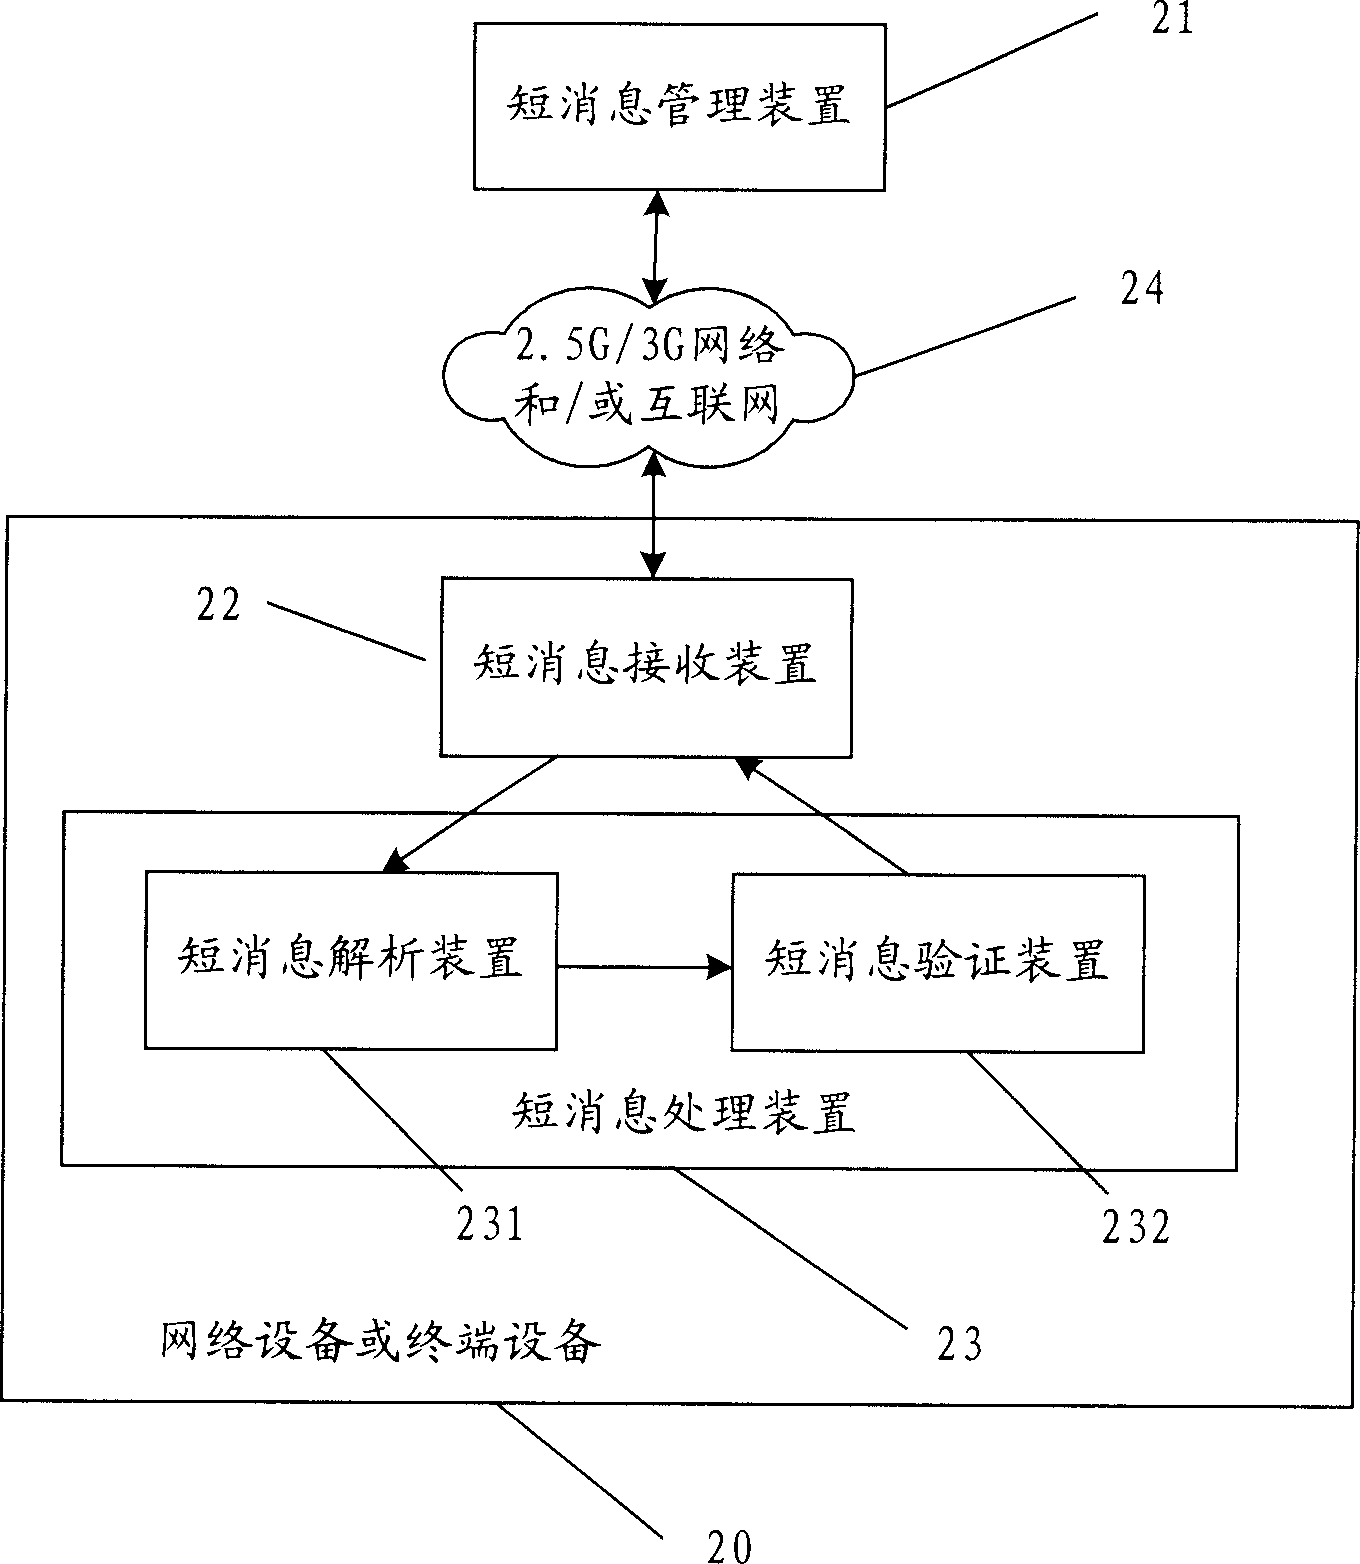 Method and system for managing and controlling network device of supporting wireless mobile communication